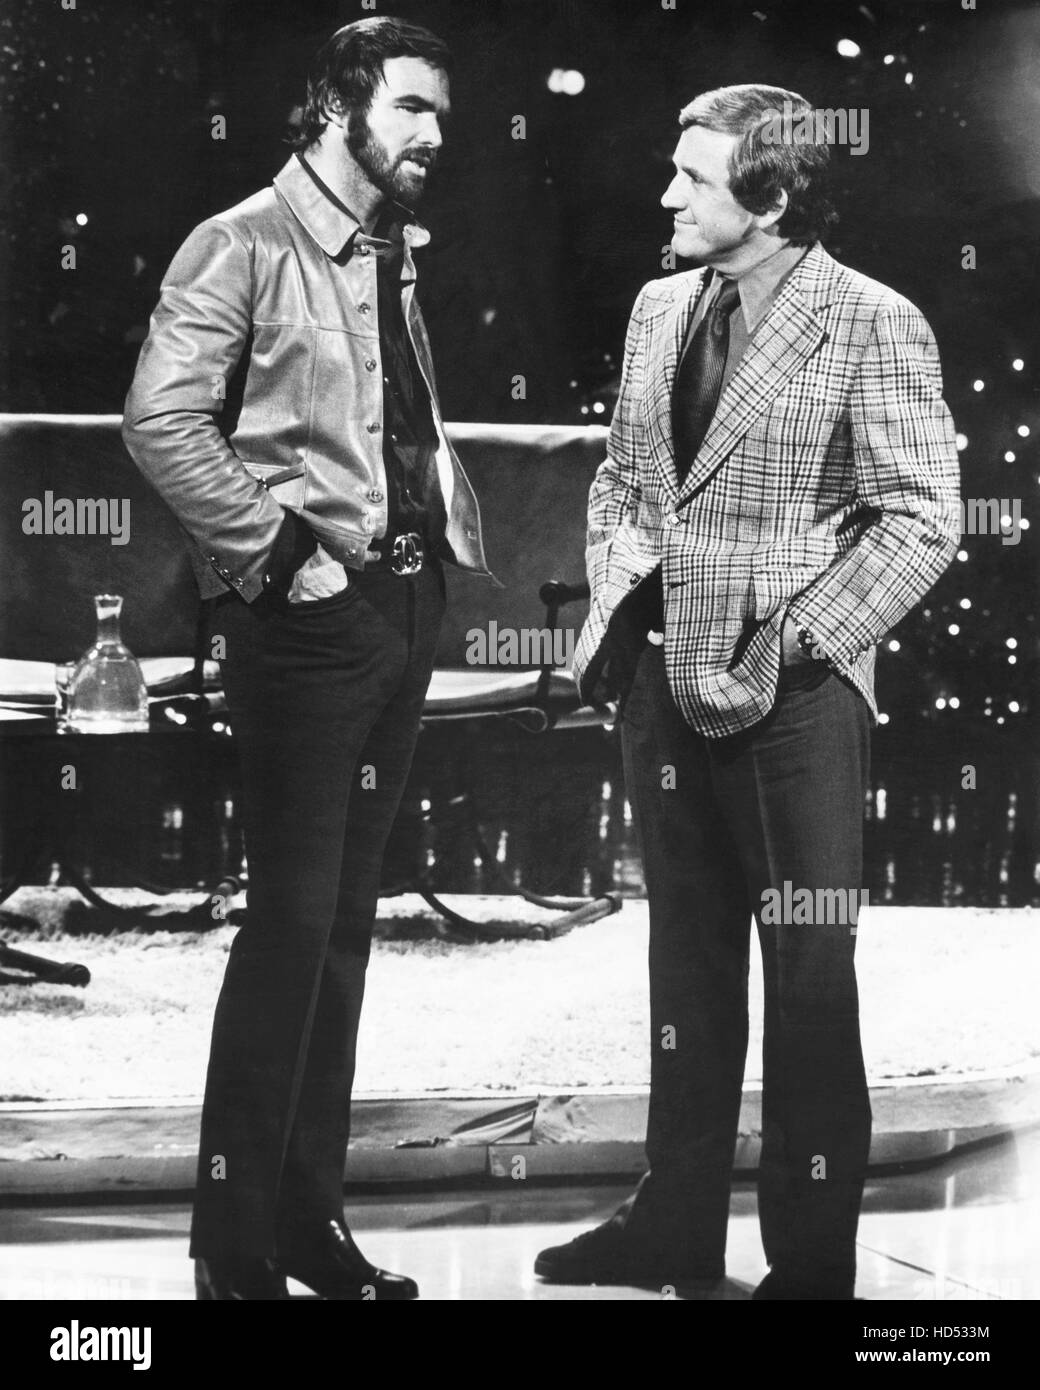 THE MERV GRIFFIN SHOW, (from left): Burt Reynolds, Merv Griffin, (ca. early 1970s), 1962-86. Stock Photo